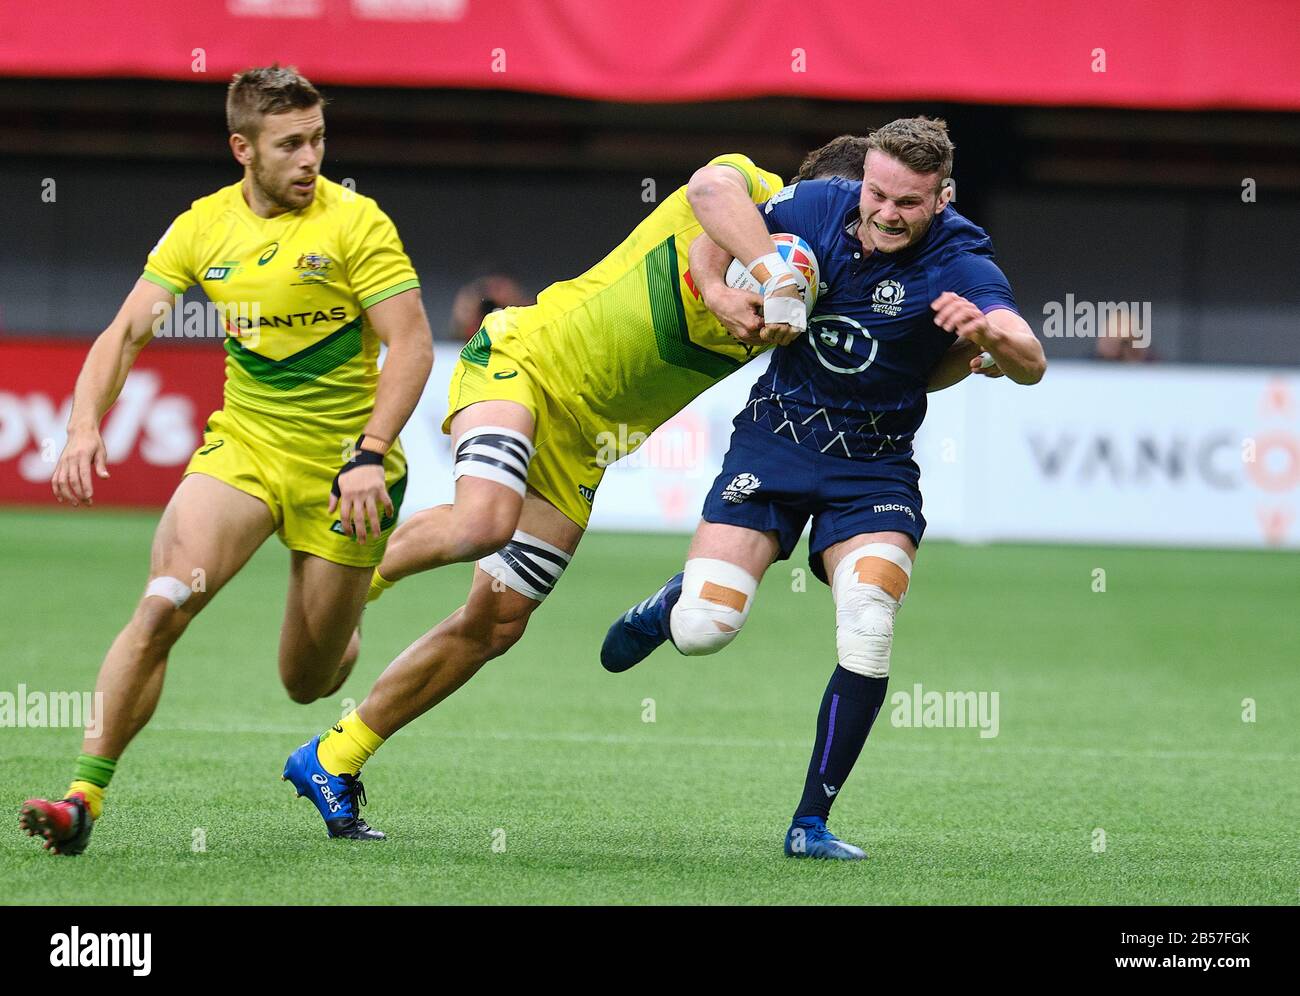 Vancouver, Canada. 7th Mar, 2020. Gavin Lowe #10 of Scotland by Australia players in Match #2 during Day 1 - 2020 HSBC World Rugby Sevens Series at BC Place in Vancouver, Canada. Credit: Joe Ng/Alamy Live News Stock Photo